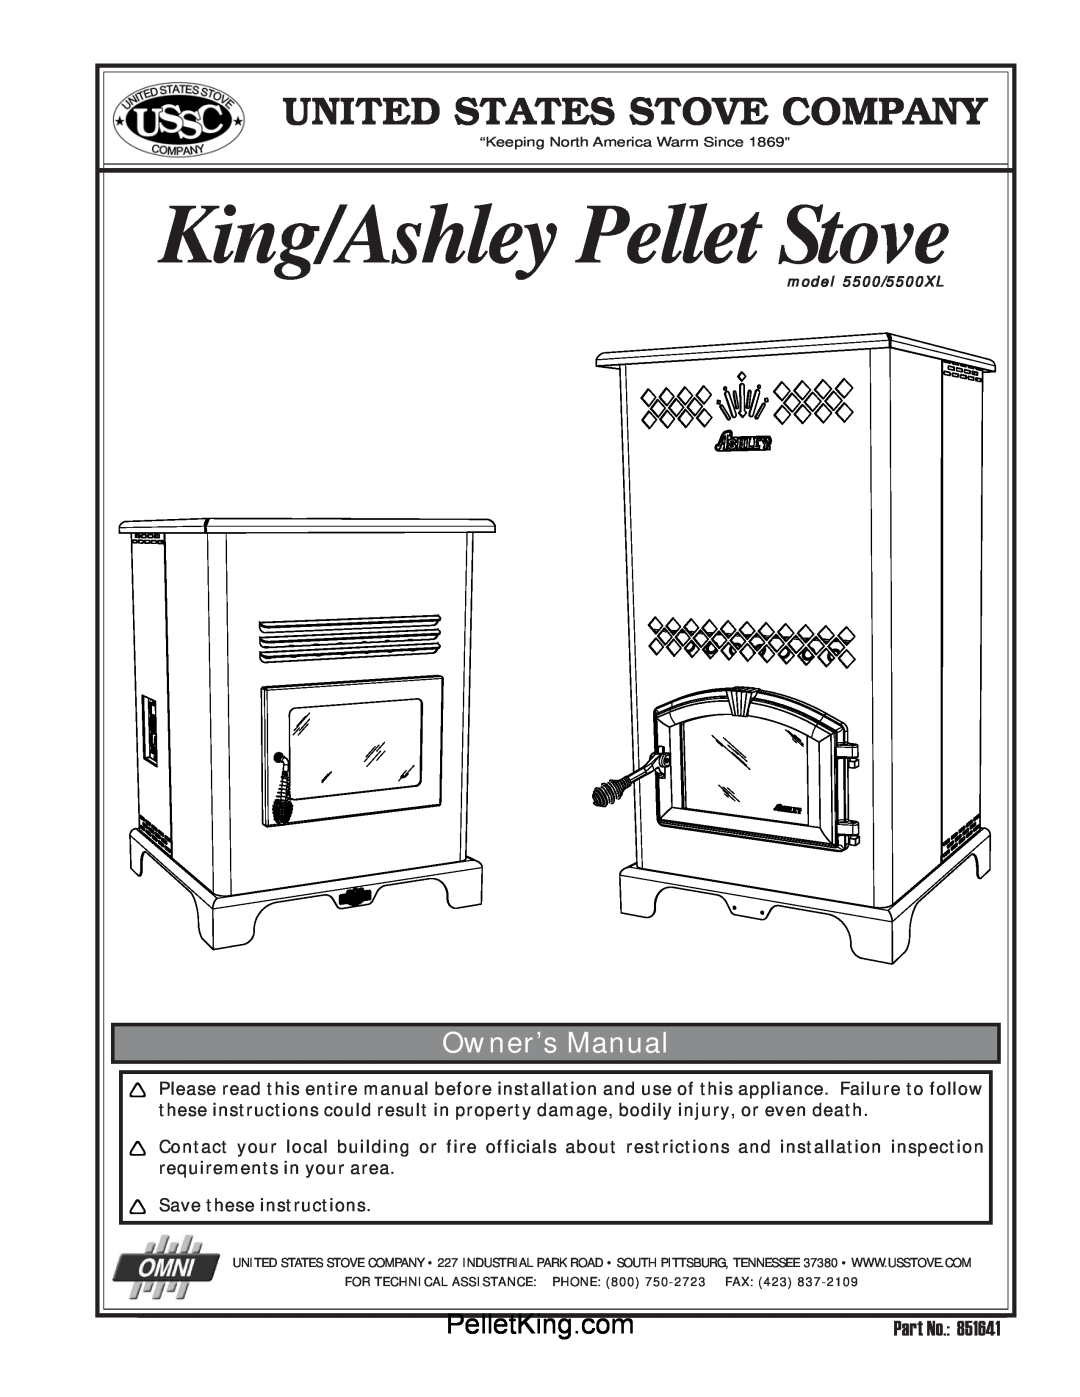 United States Stove 5500/5500XL owner manual King/Ashley Pellet Stove, United States Stove Company 